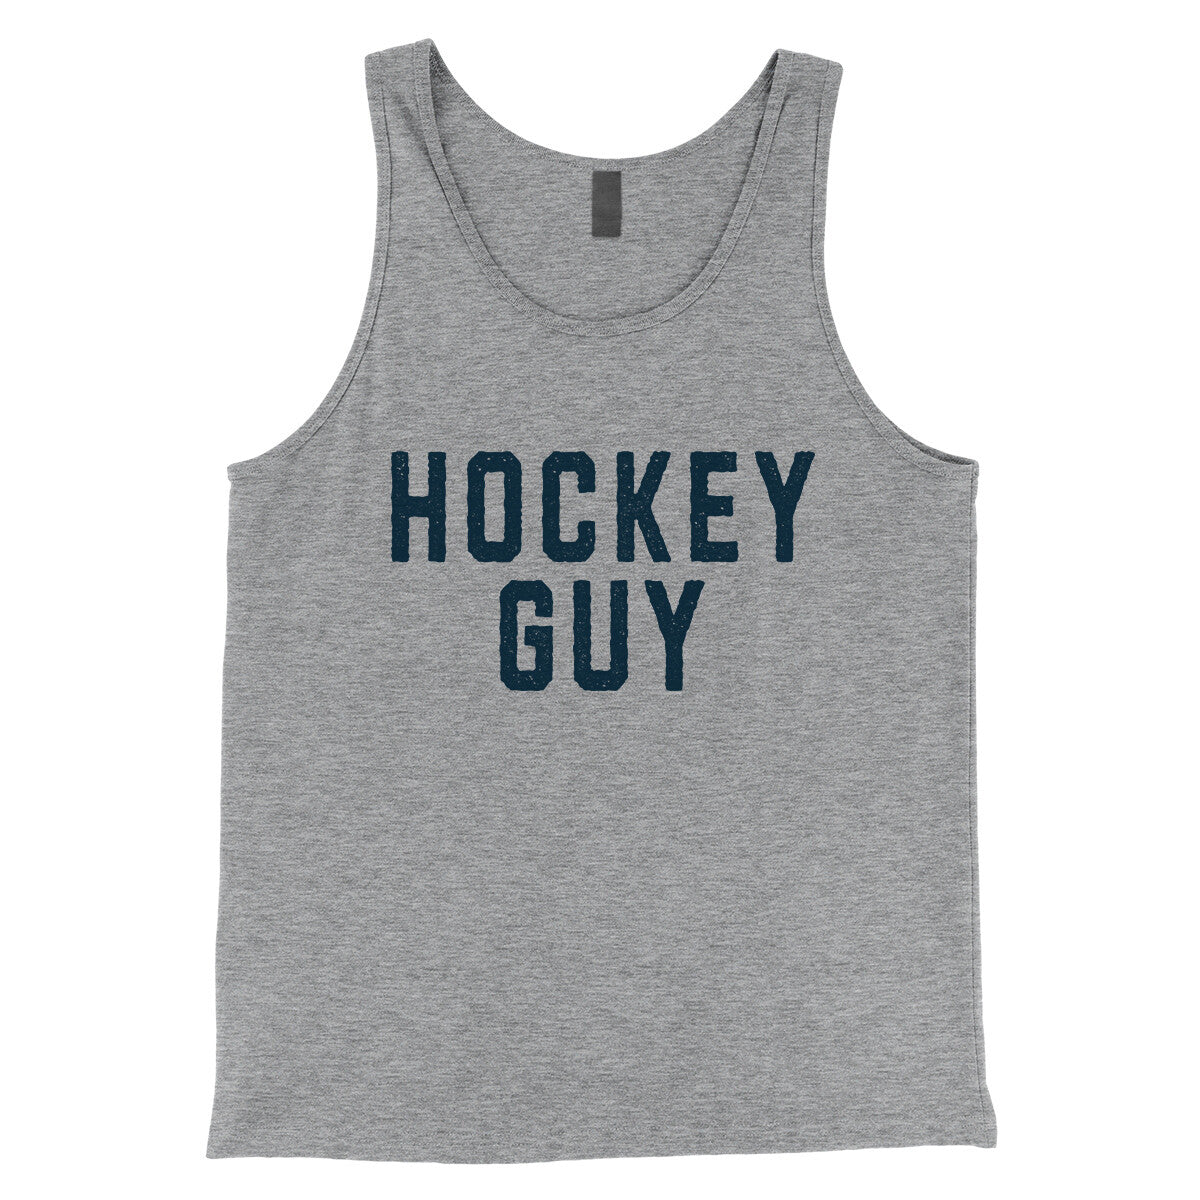 Hockey Guy in Athletic Heather Color